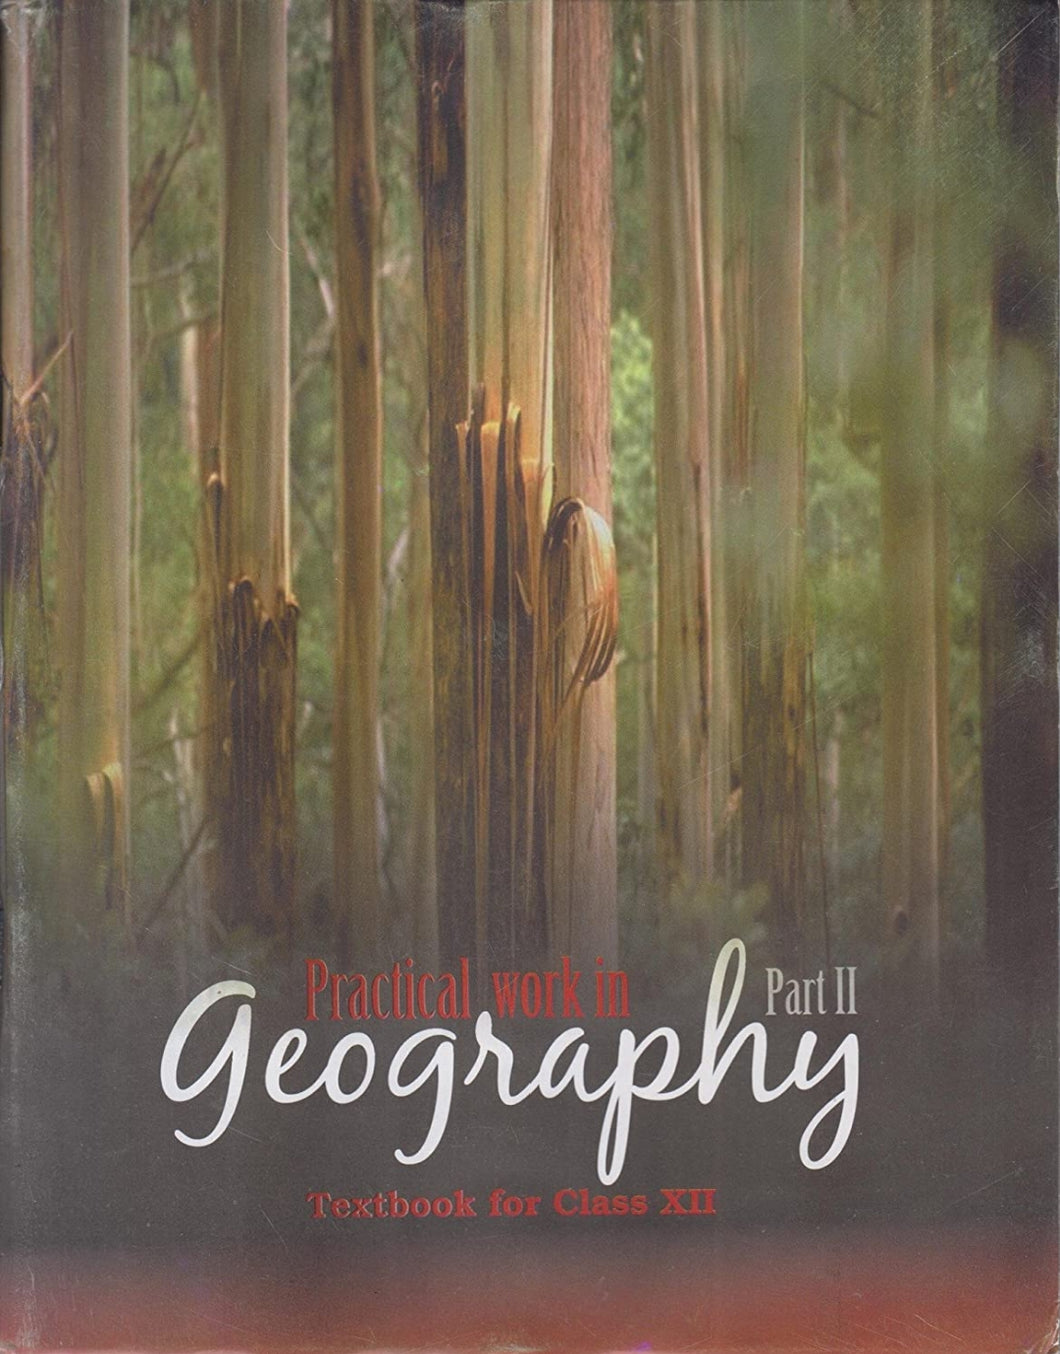 NCERT Prac.Work In Geography for Class 12 - latest edition as per NCERT/CBSE - Booksfy